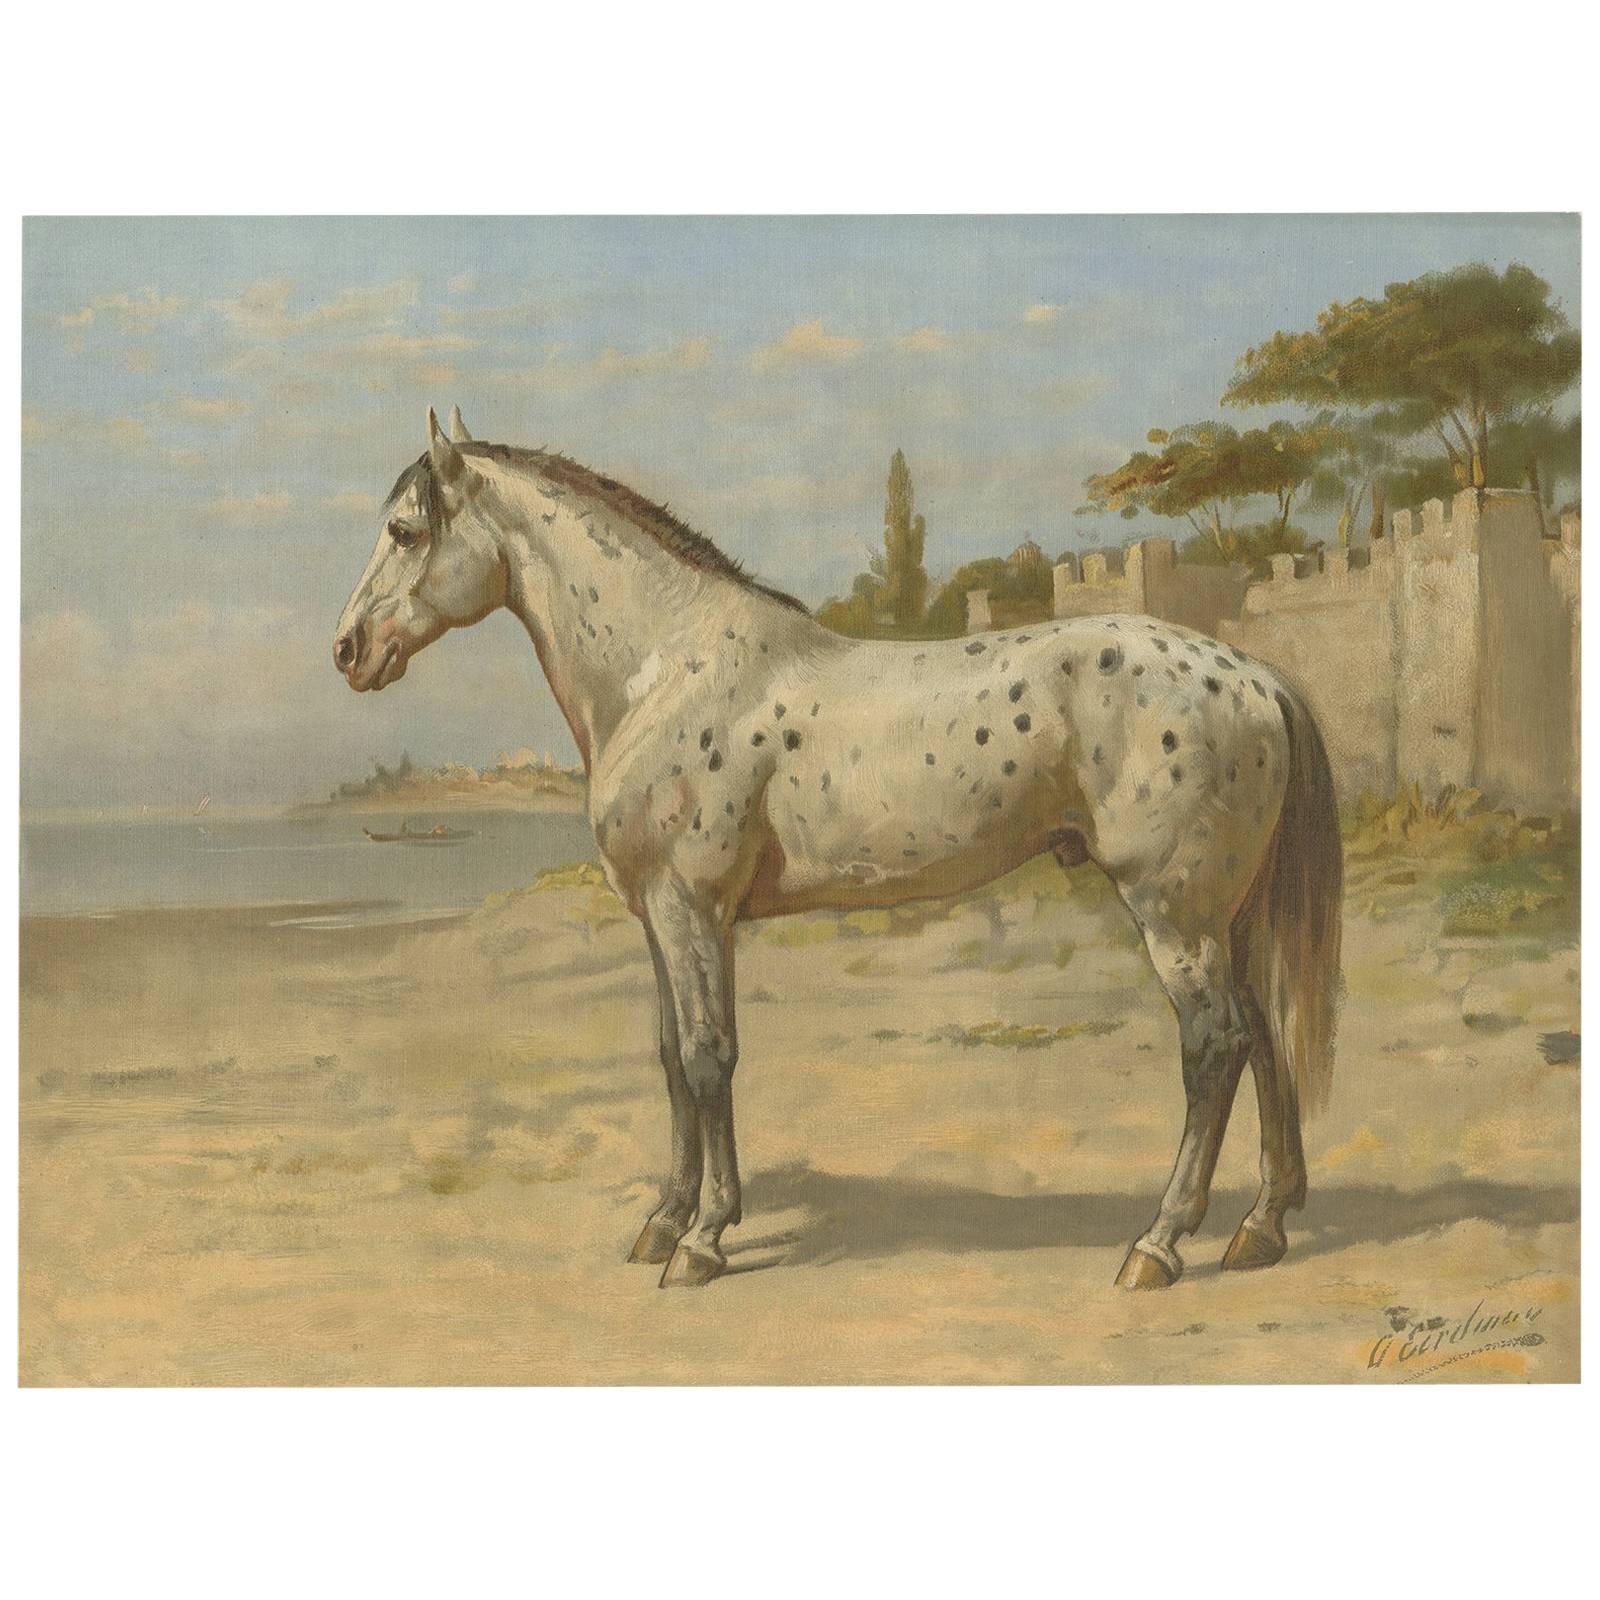 Antique Print of the Turkish Horse by O. Eerelman, 1898